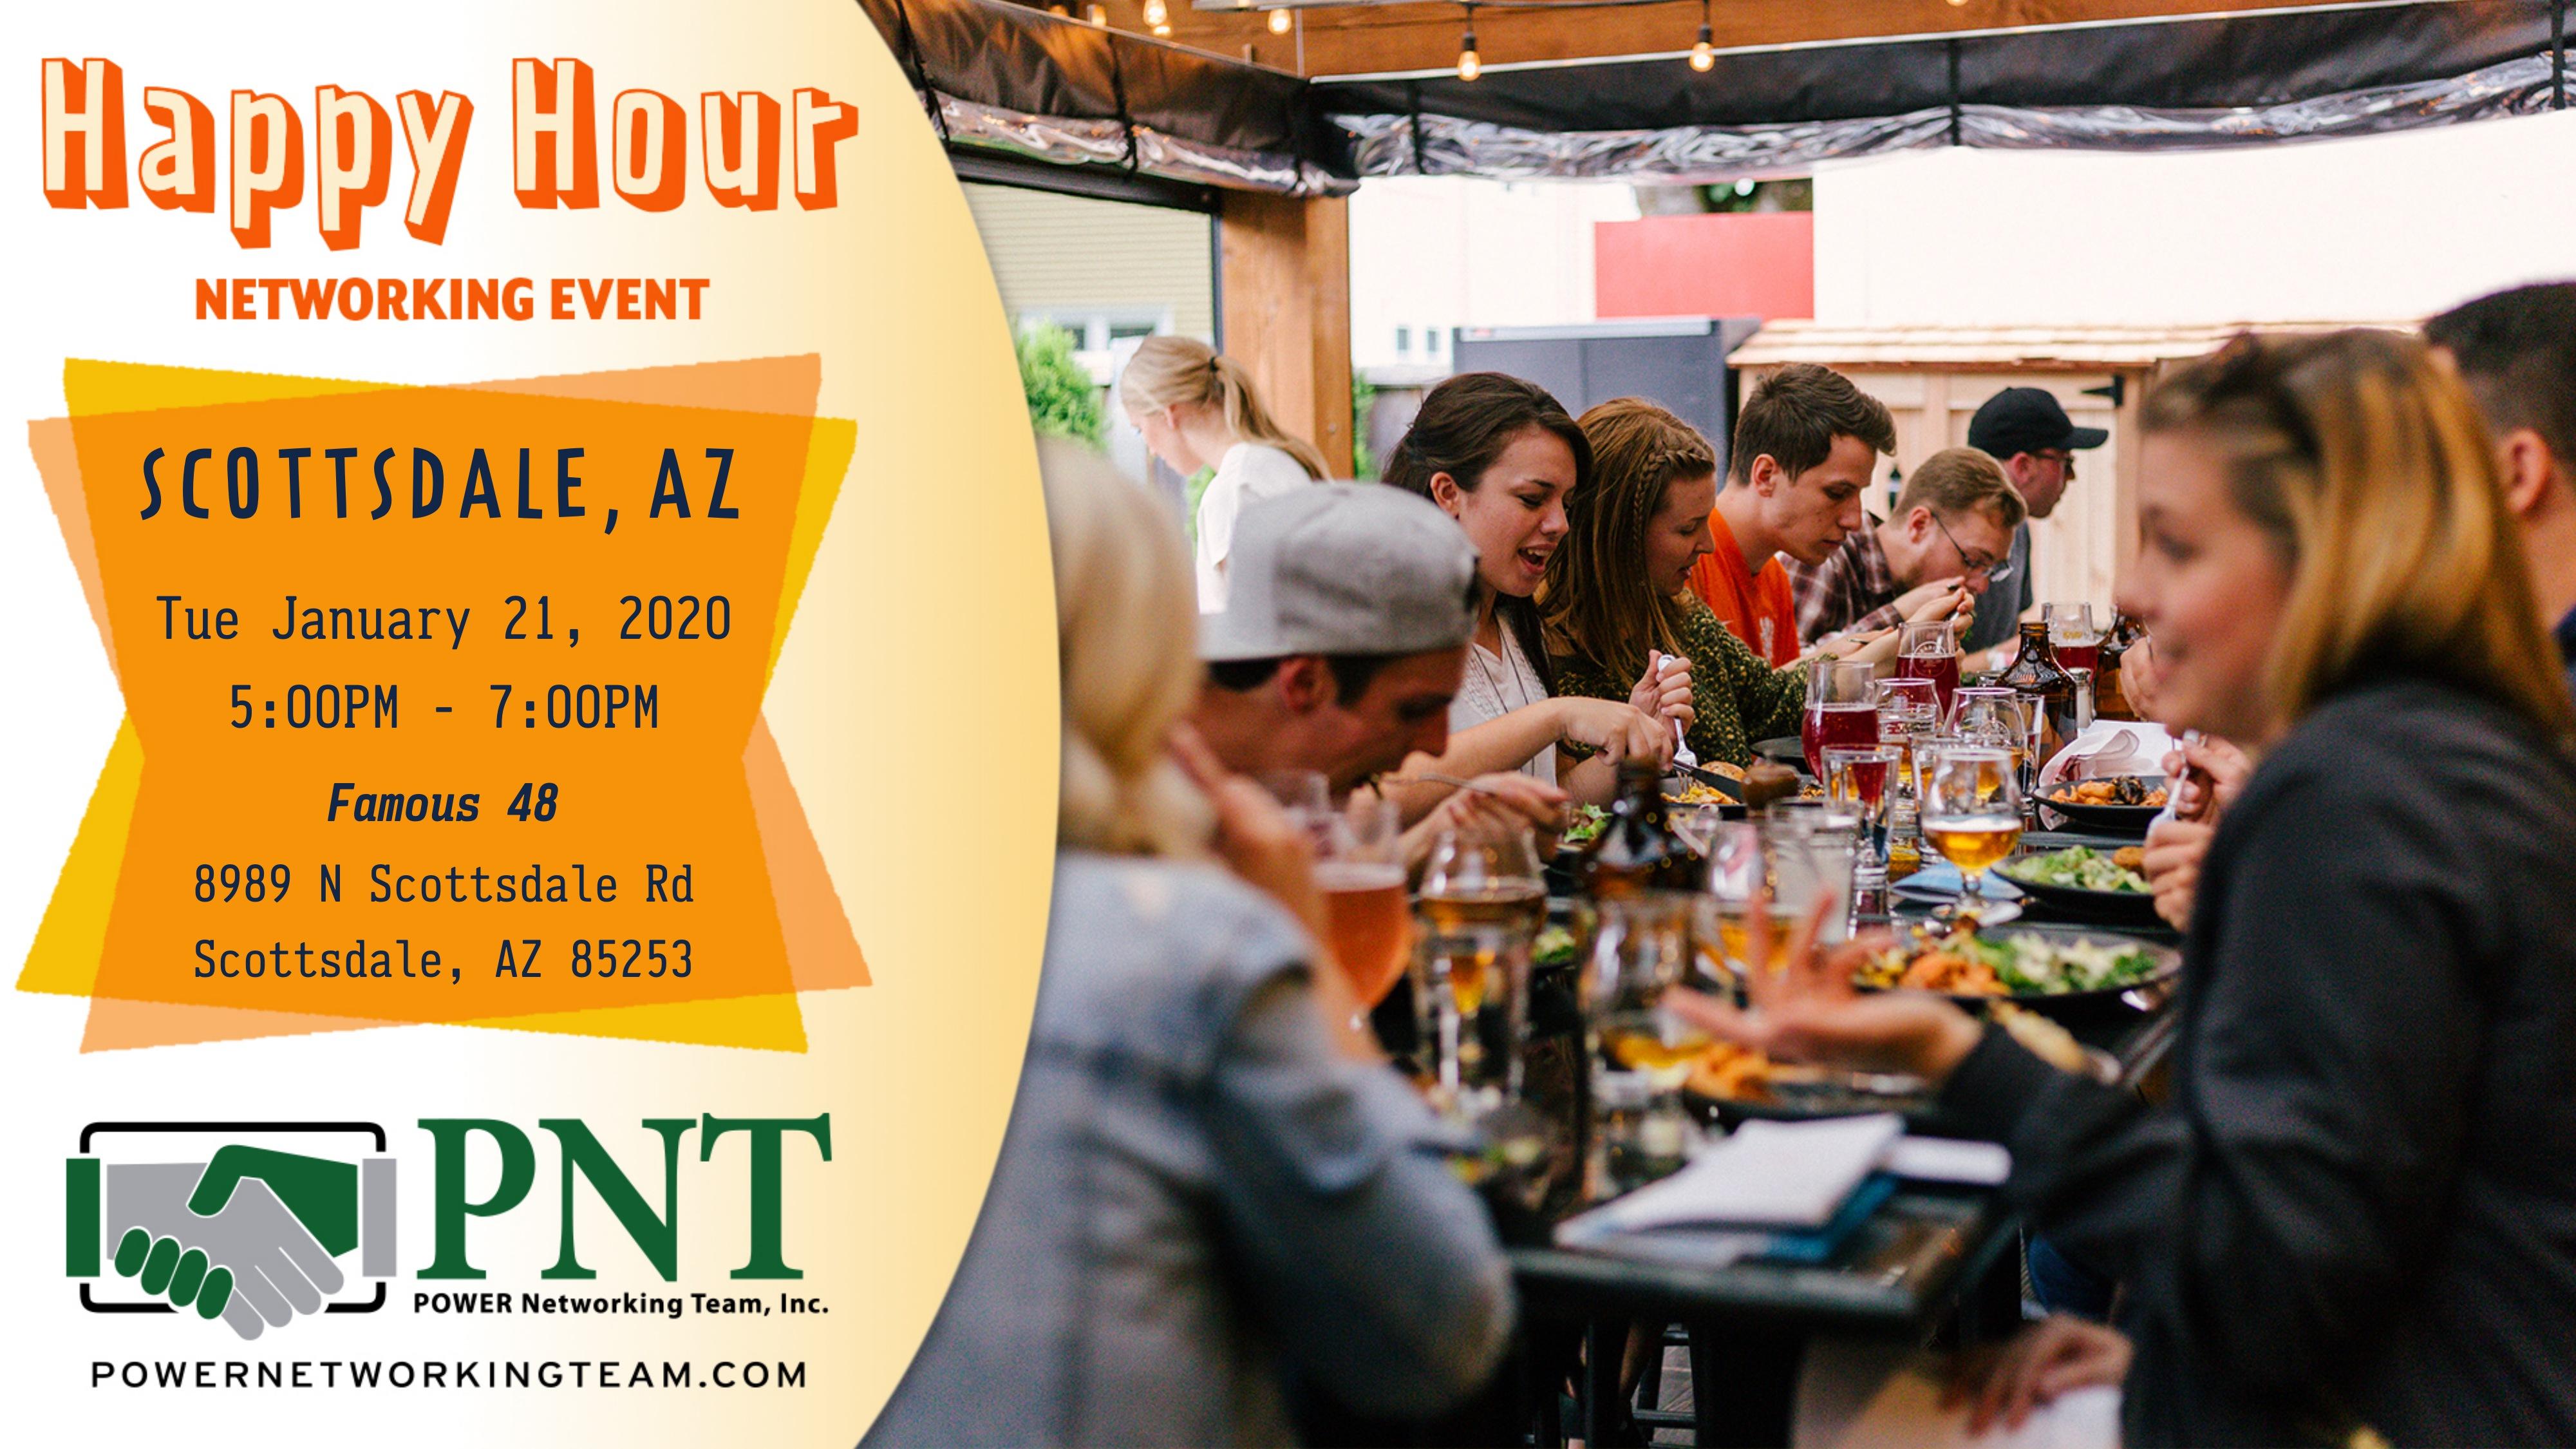 01/21/20 PNT Central Scottsdale Happy Hour Networking Event